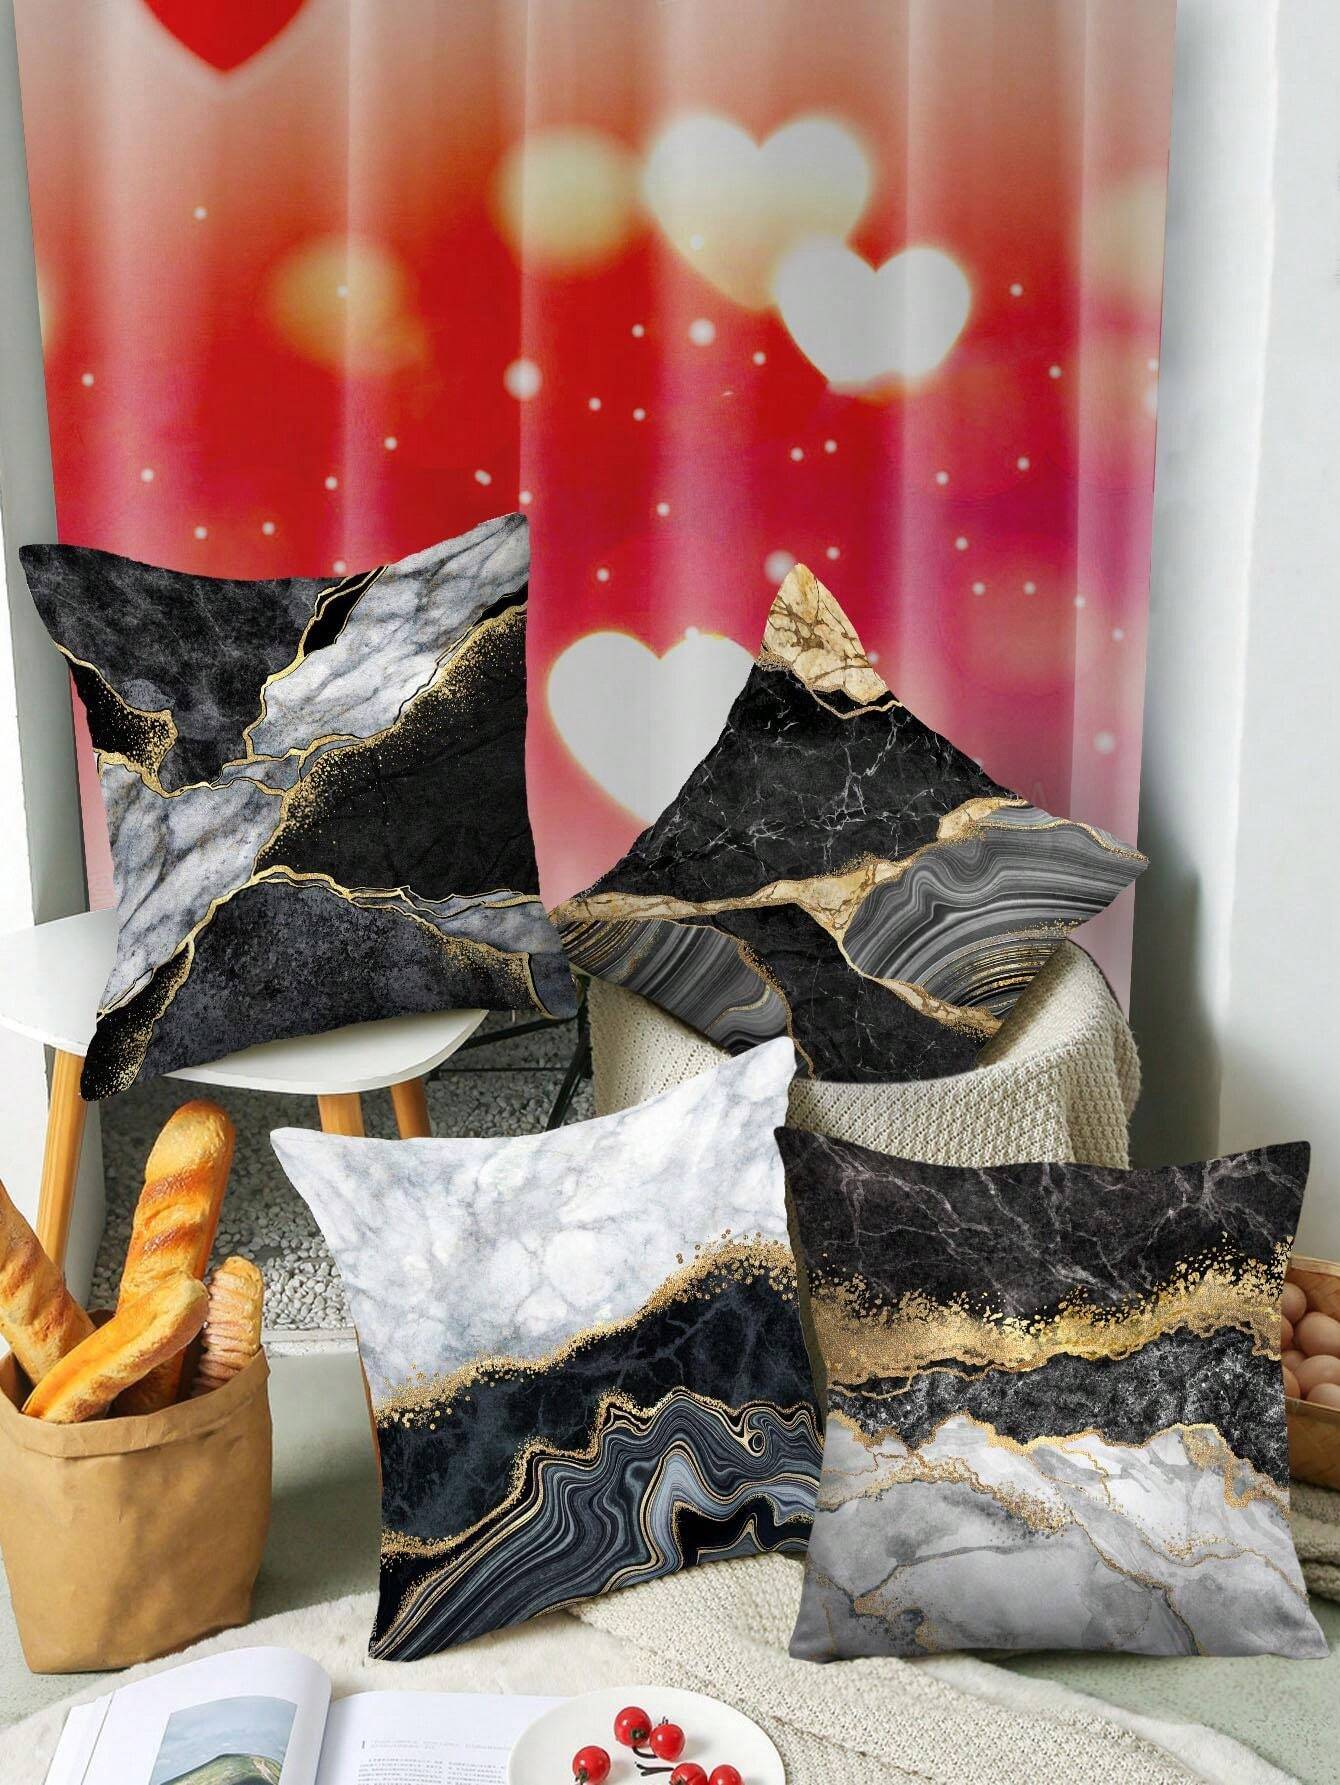 4pcs/Set Black & Gold Marble Pillow Covers With Abstract Print, Decorative Cushion Cases For Sofa, Car, Bed, Home Décor, Pillowcases Only, No Insert